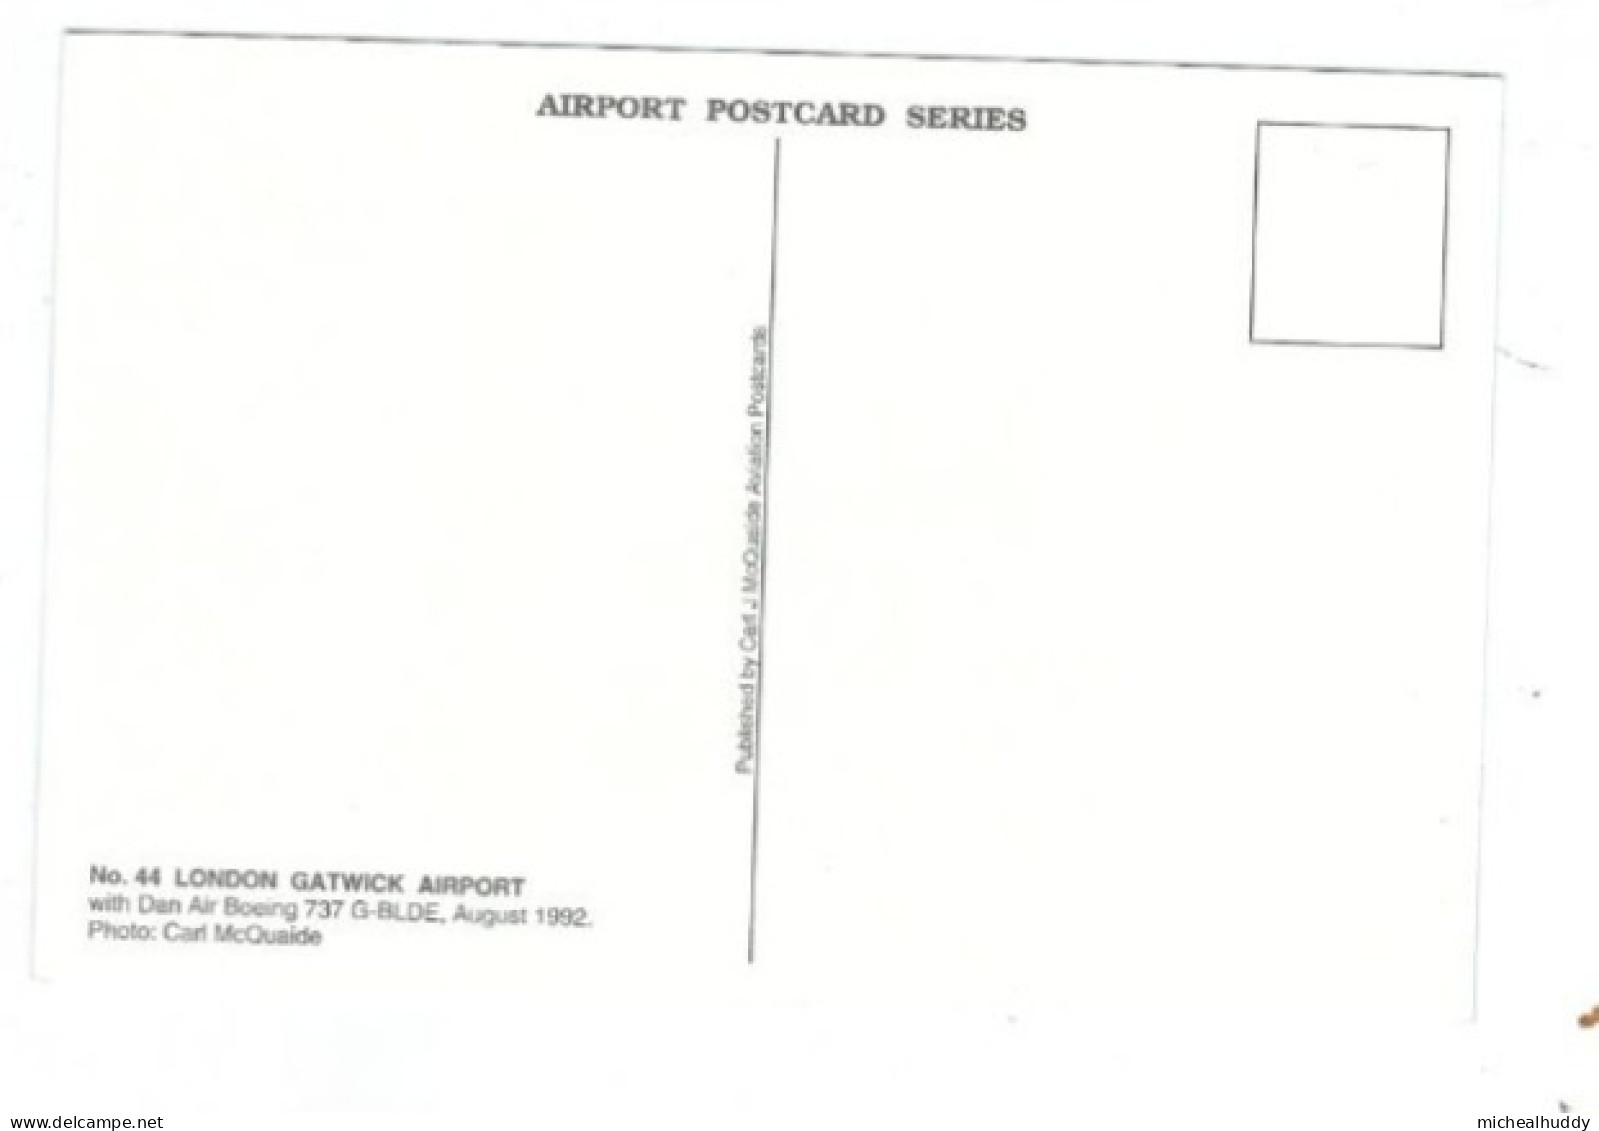 POSTCARD   PUBL BY  BY C MCQUAIDE IN HIS AIRPORT SERIES  LONDON GATWICK   CARD N0  44 - Aerodromi